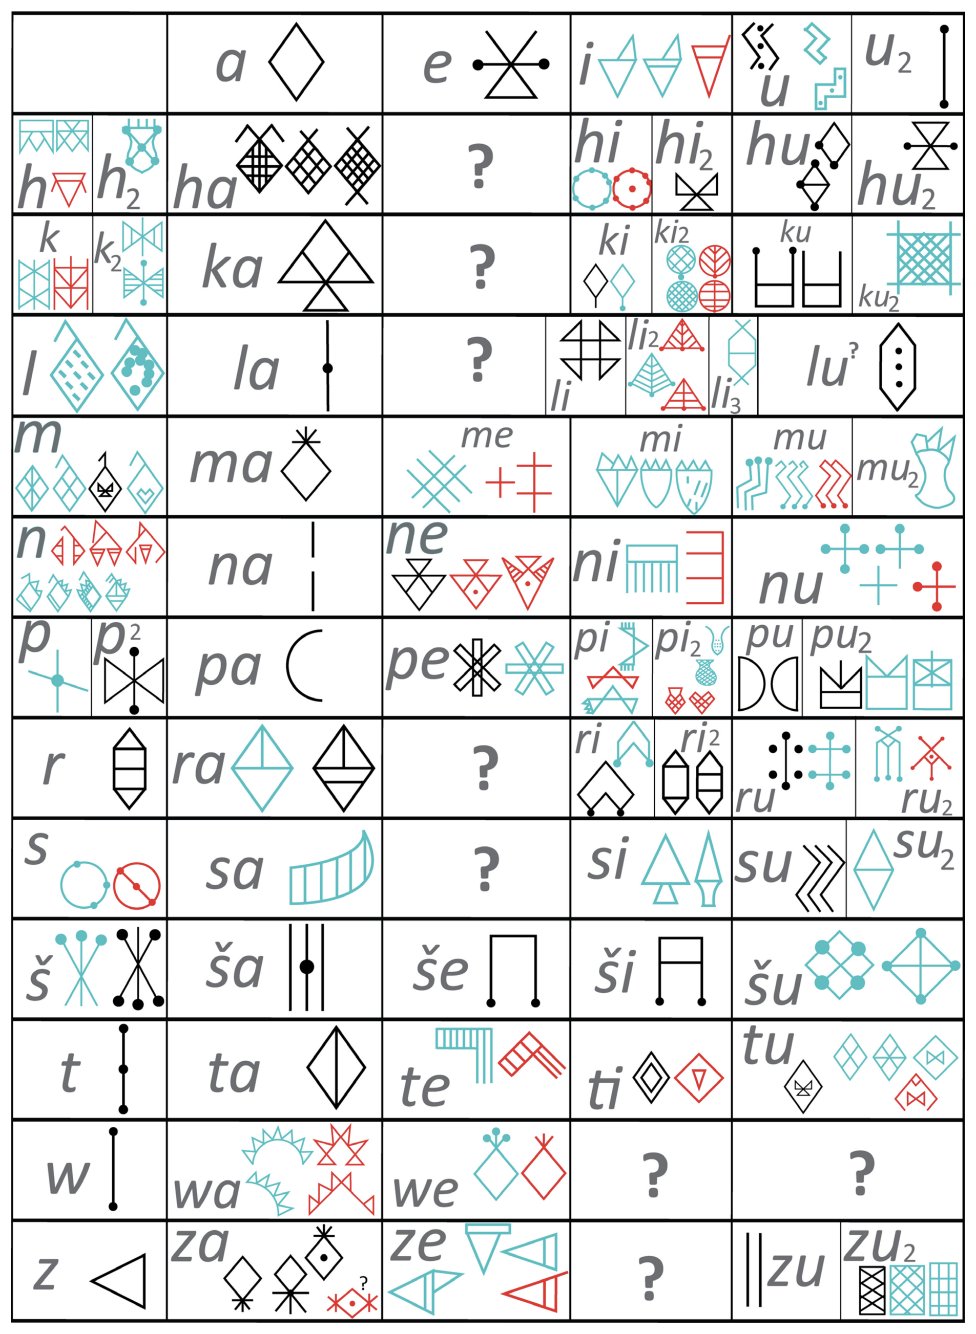 Grid of the 72 deciphered alpha-syllabic signs on which the transliteration system of Linear Elamite is based. The most common graphic variants are shown for each sign. Blue signs are attested in southwestern Iran, red ones in southeastern Iran. Black signs are common to both areas. F. Desset